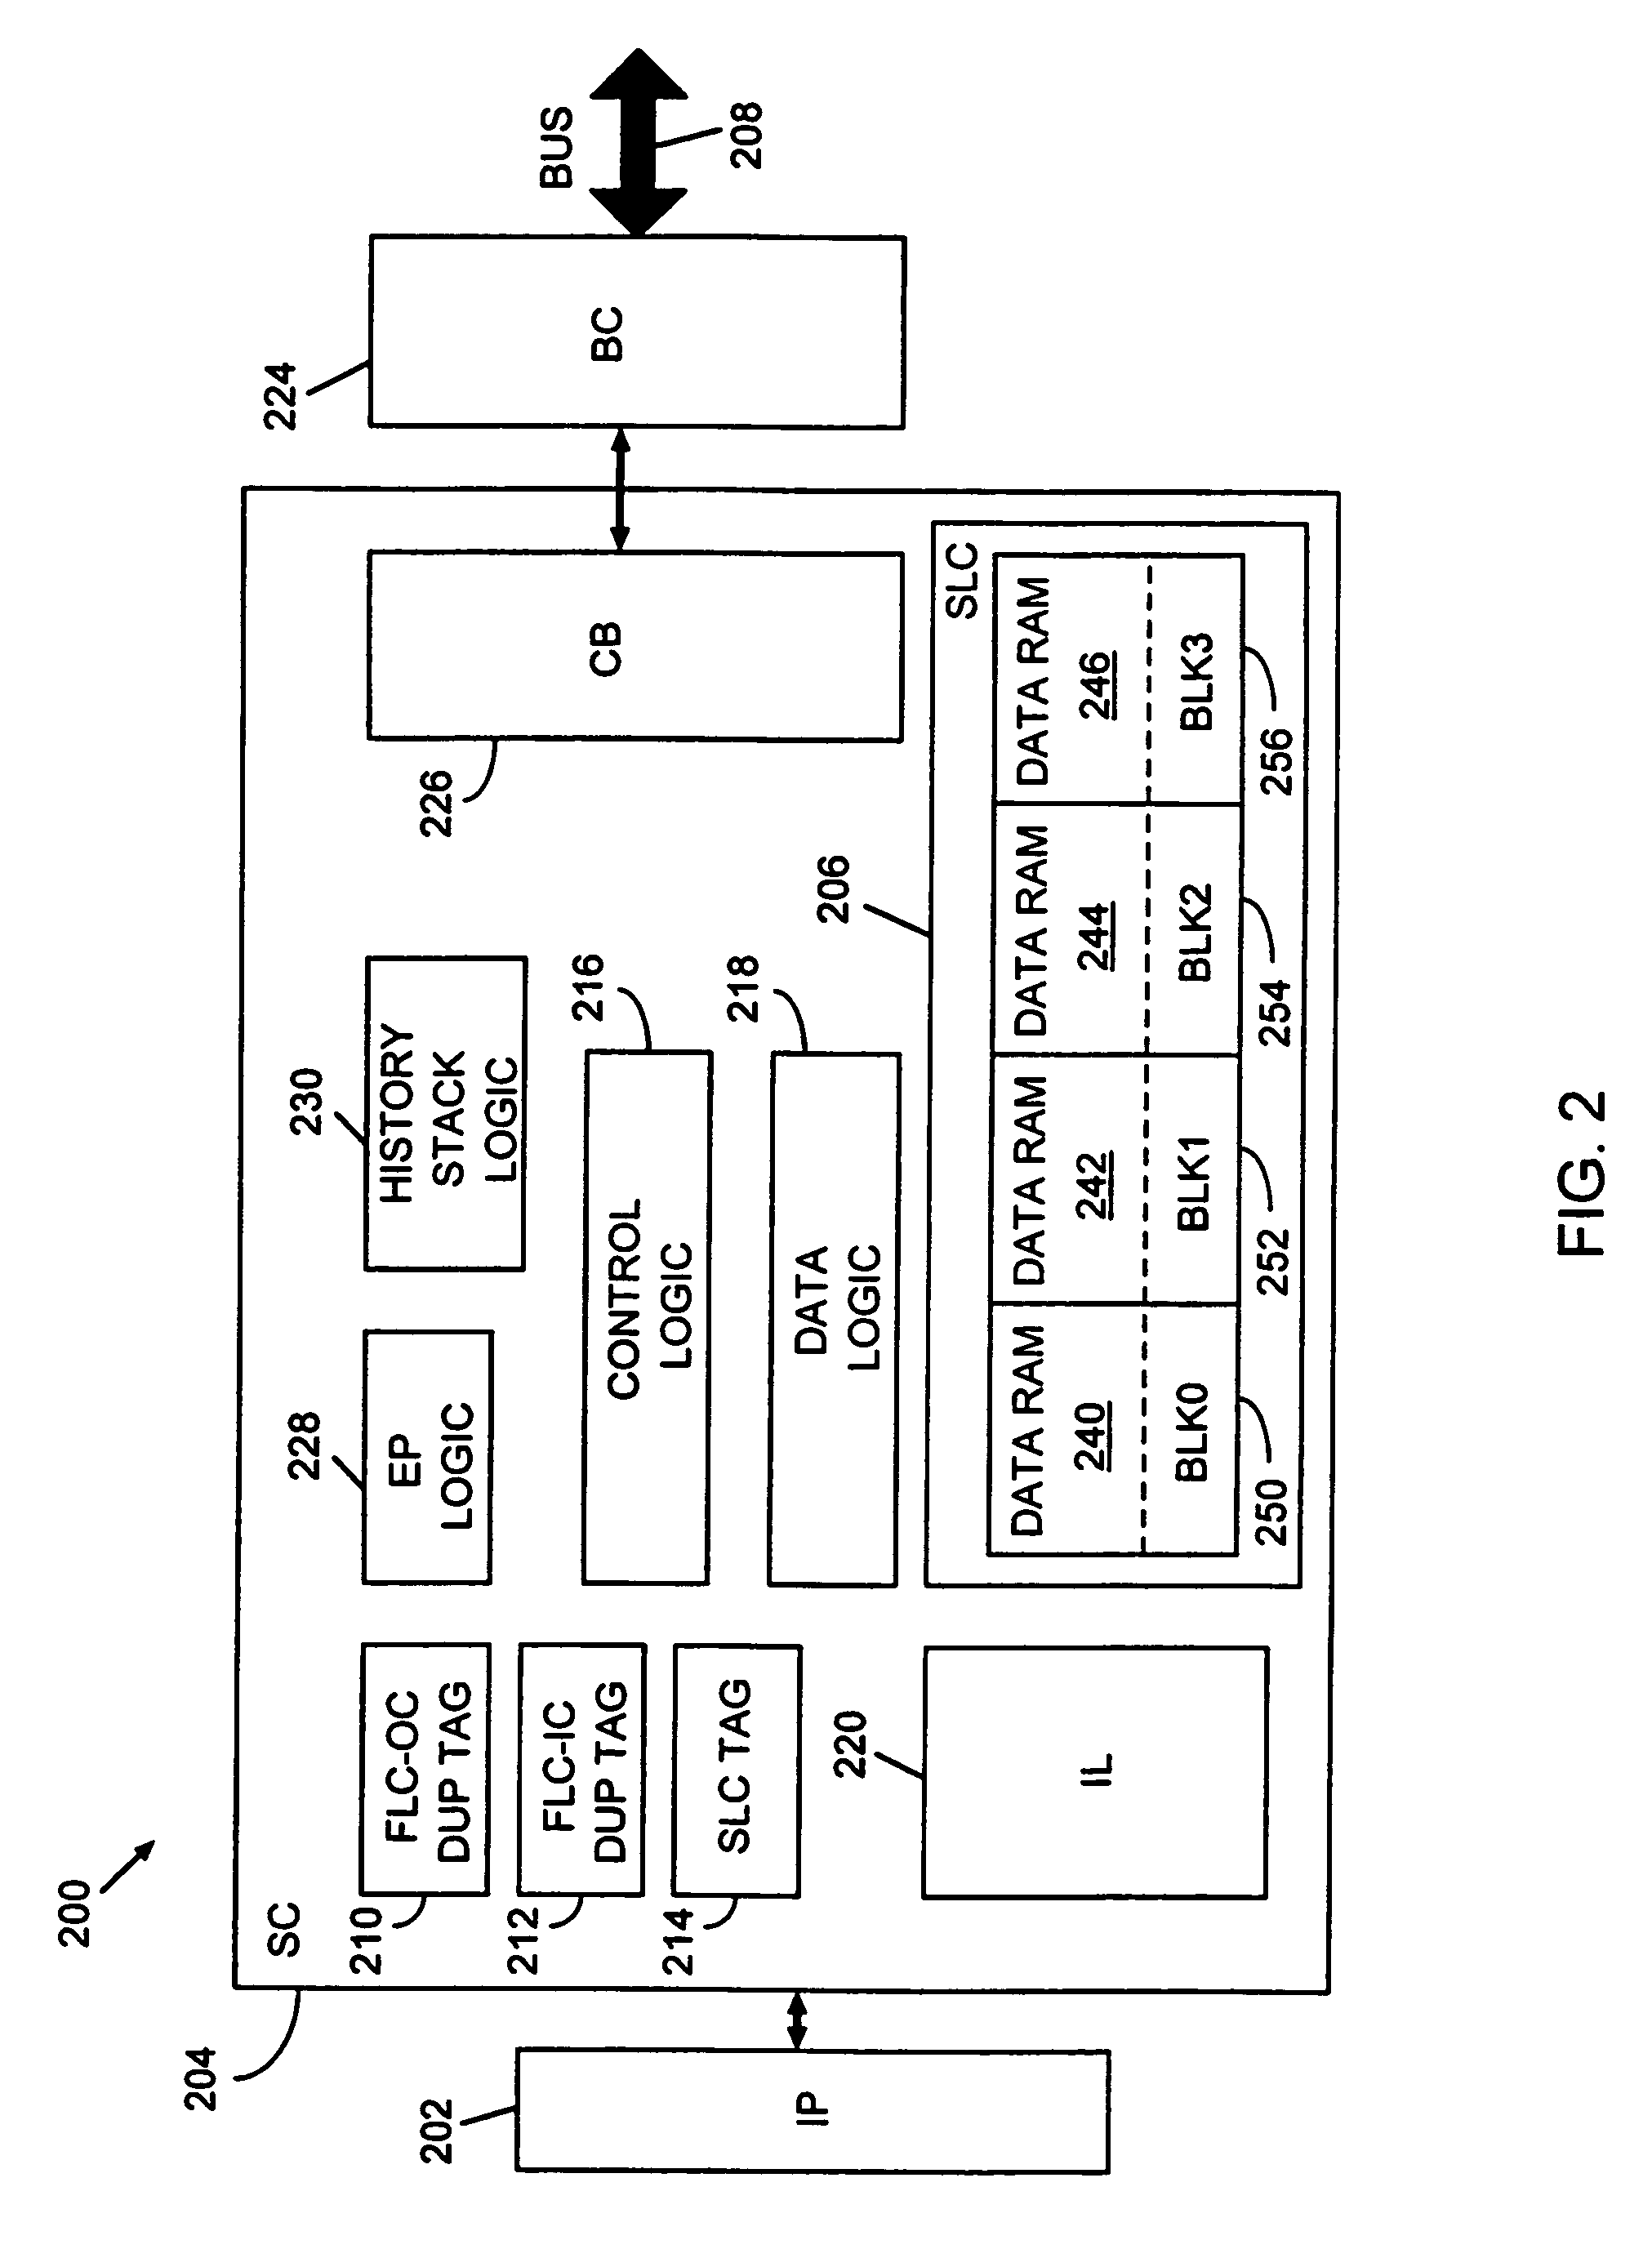 System and method for increasing cache hit detection performance